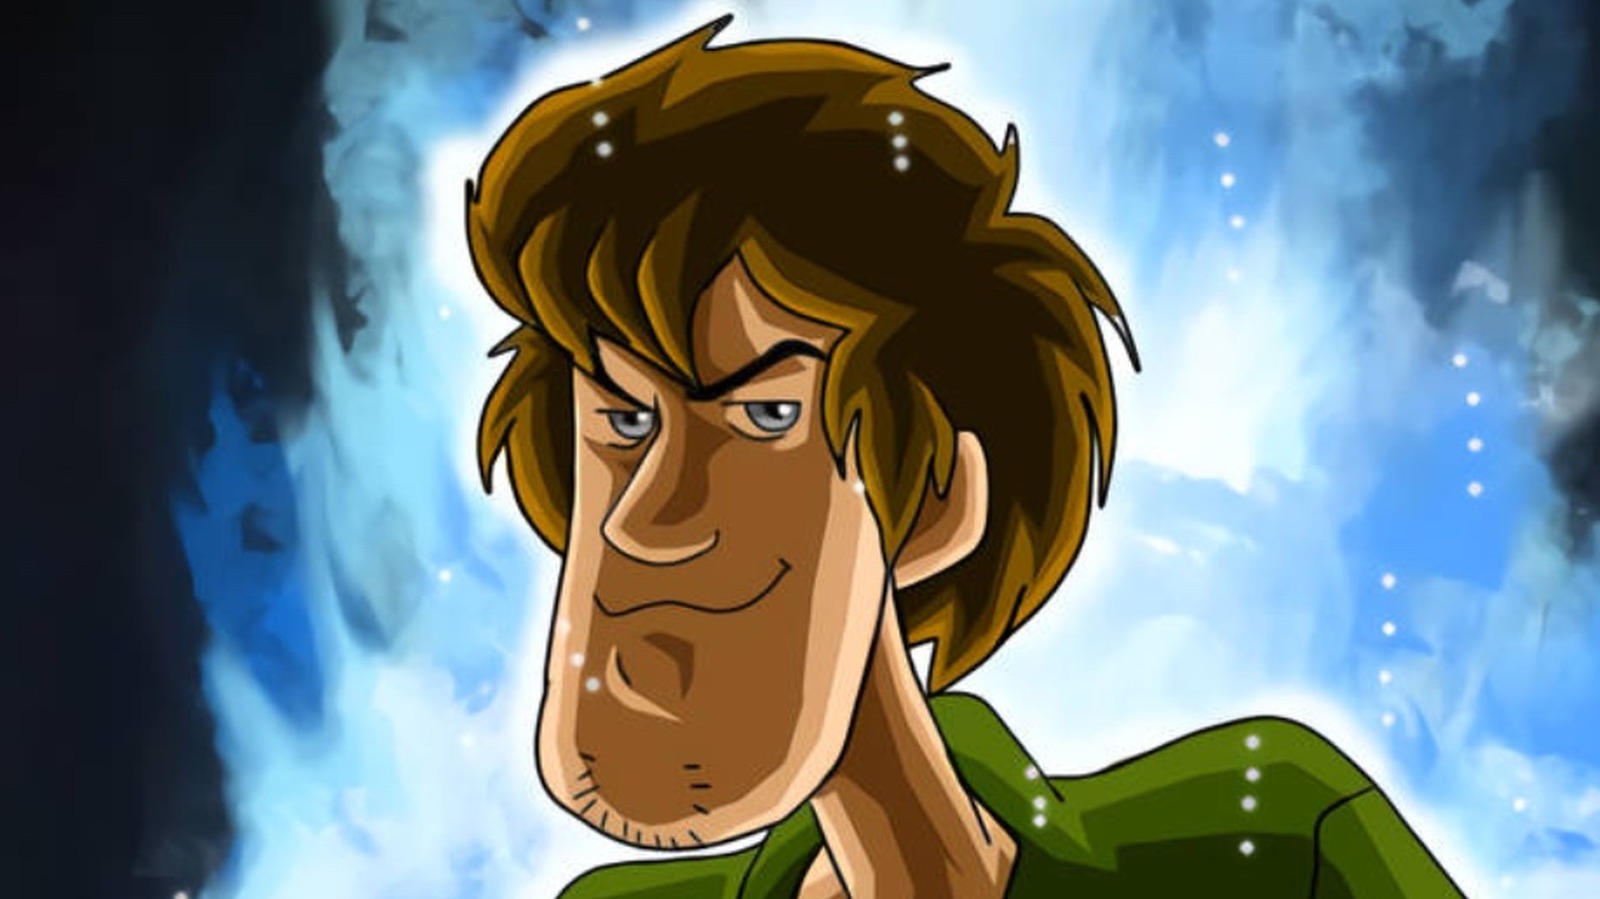 New Smash Bros. Clone Confirms What We All Suspected About Shaggy